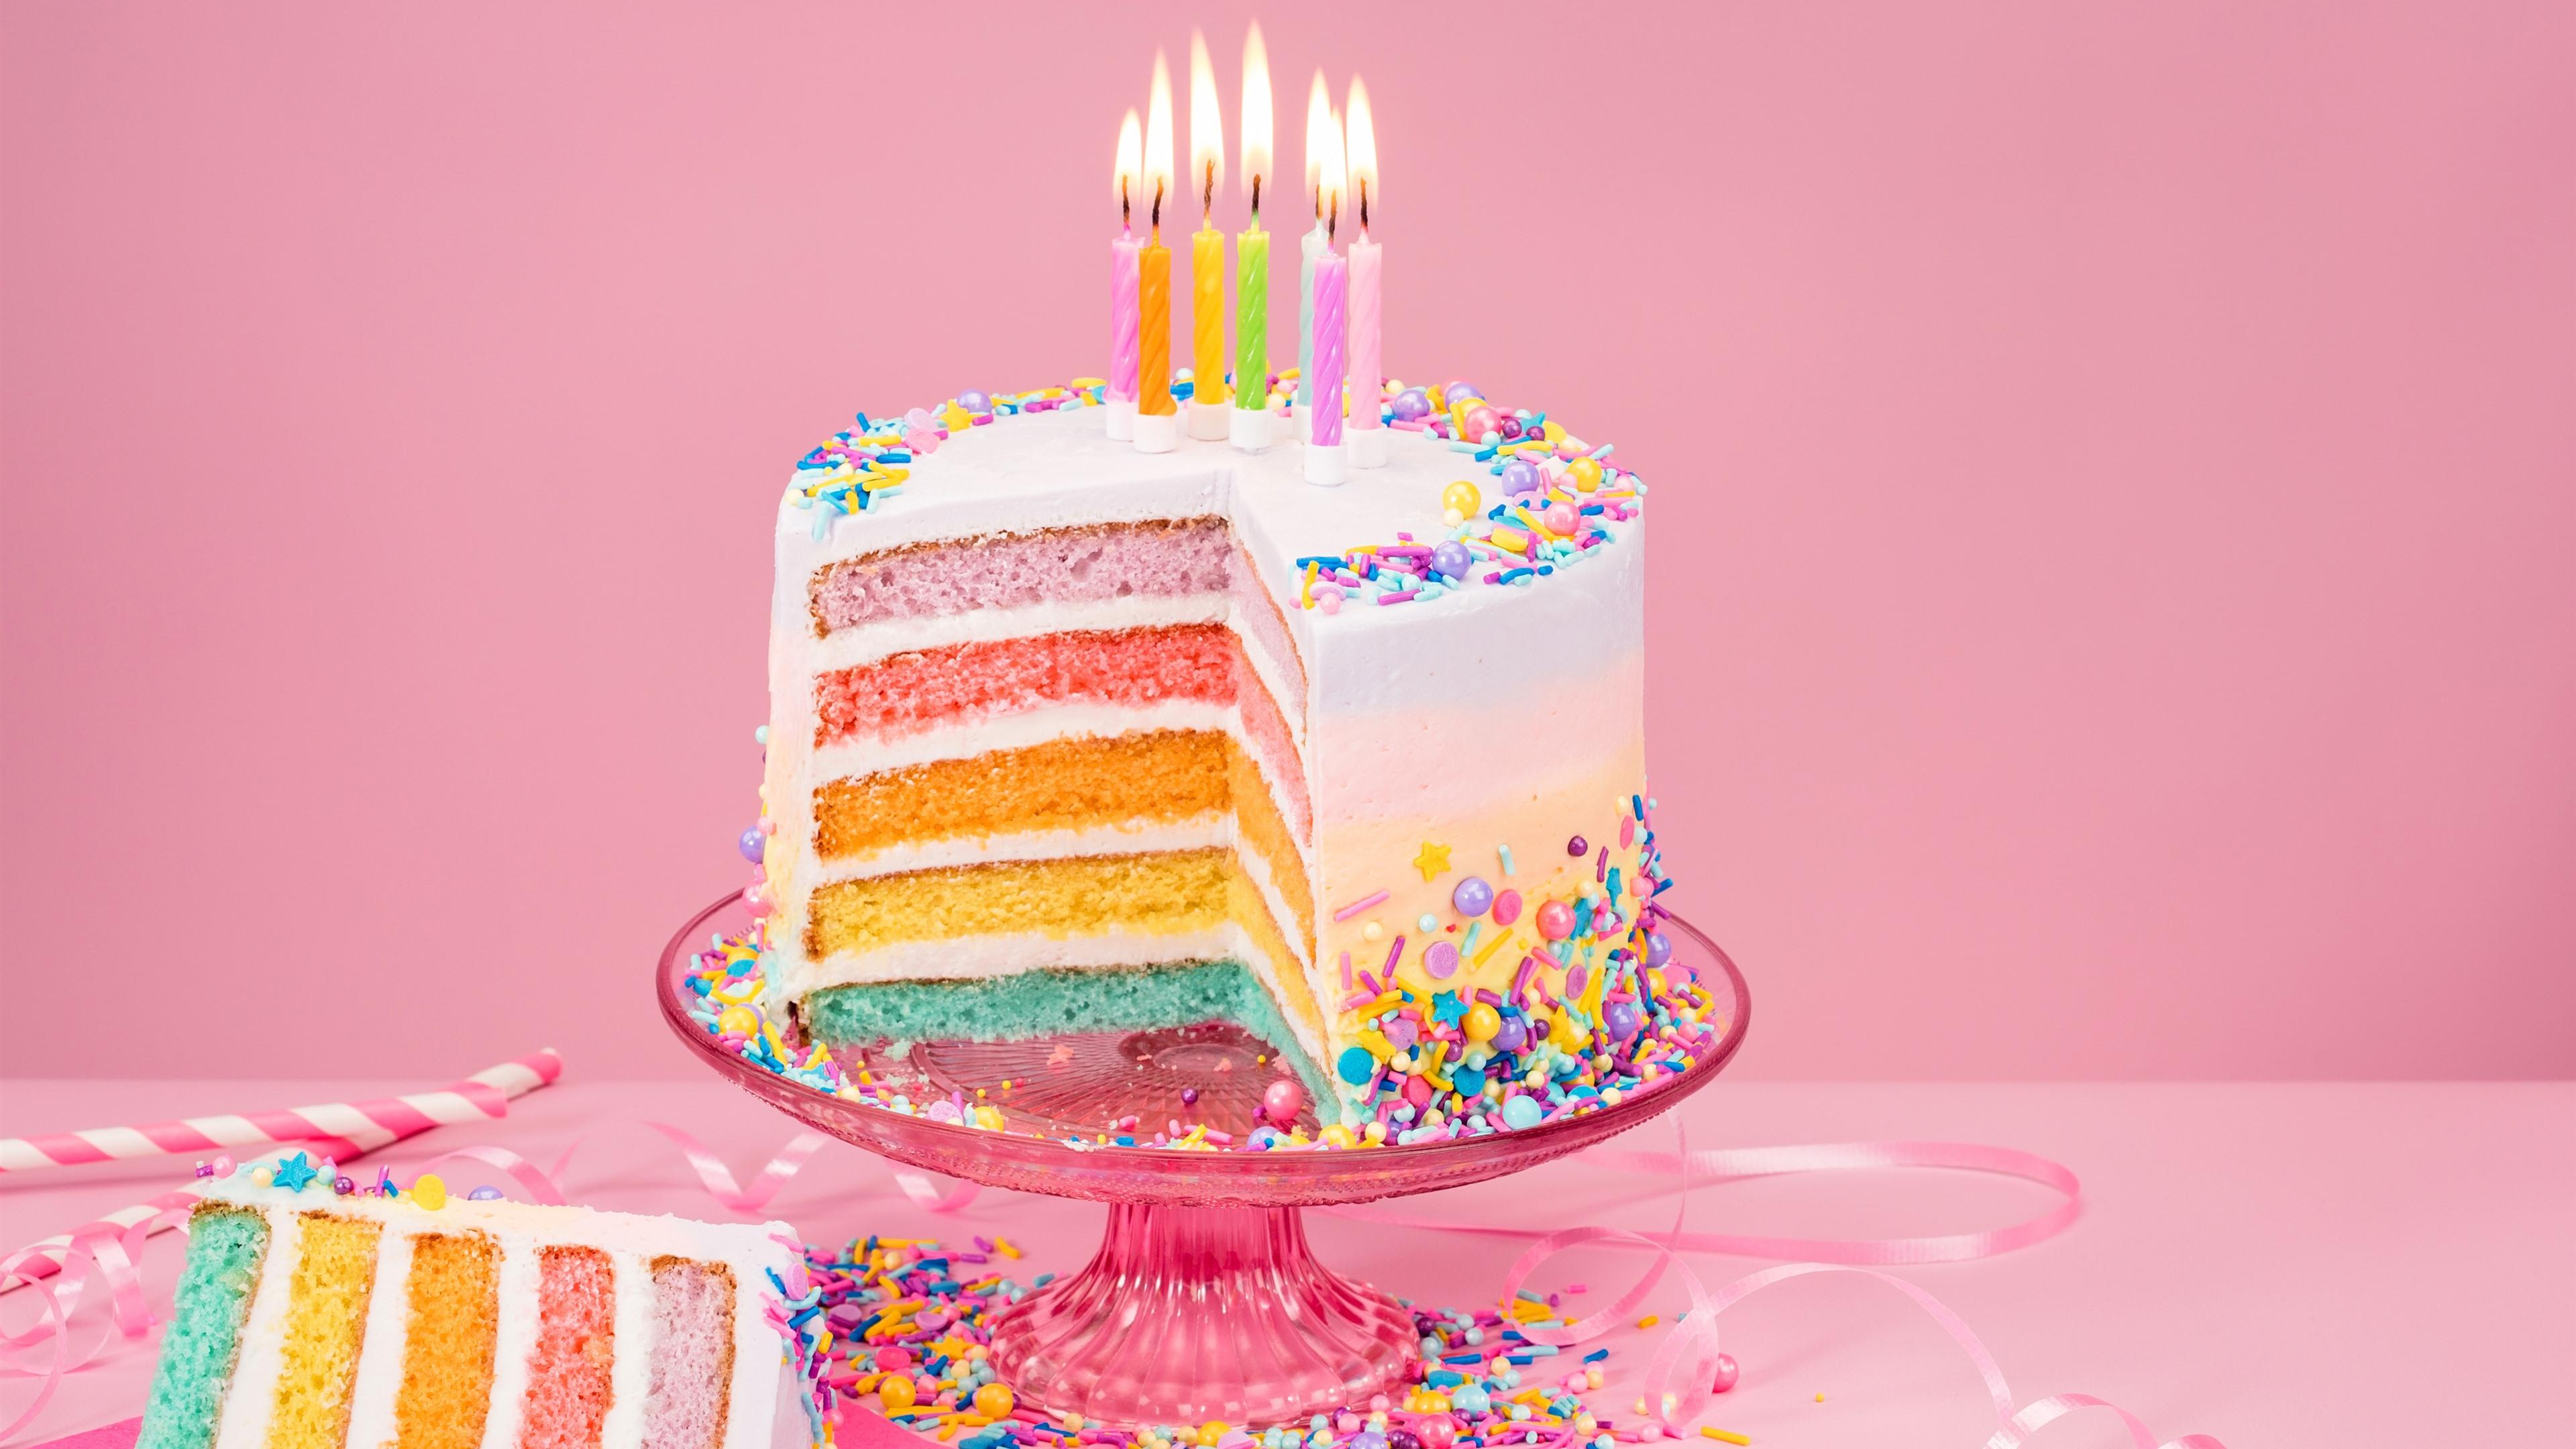 Wallpaper Birthday cake, colorful layers, rainbow color, candles, flame 3840x2160 UHD 4K Picture, Image